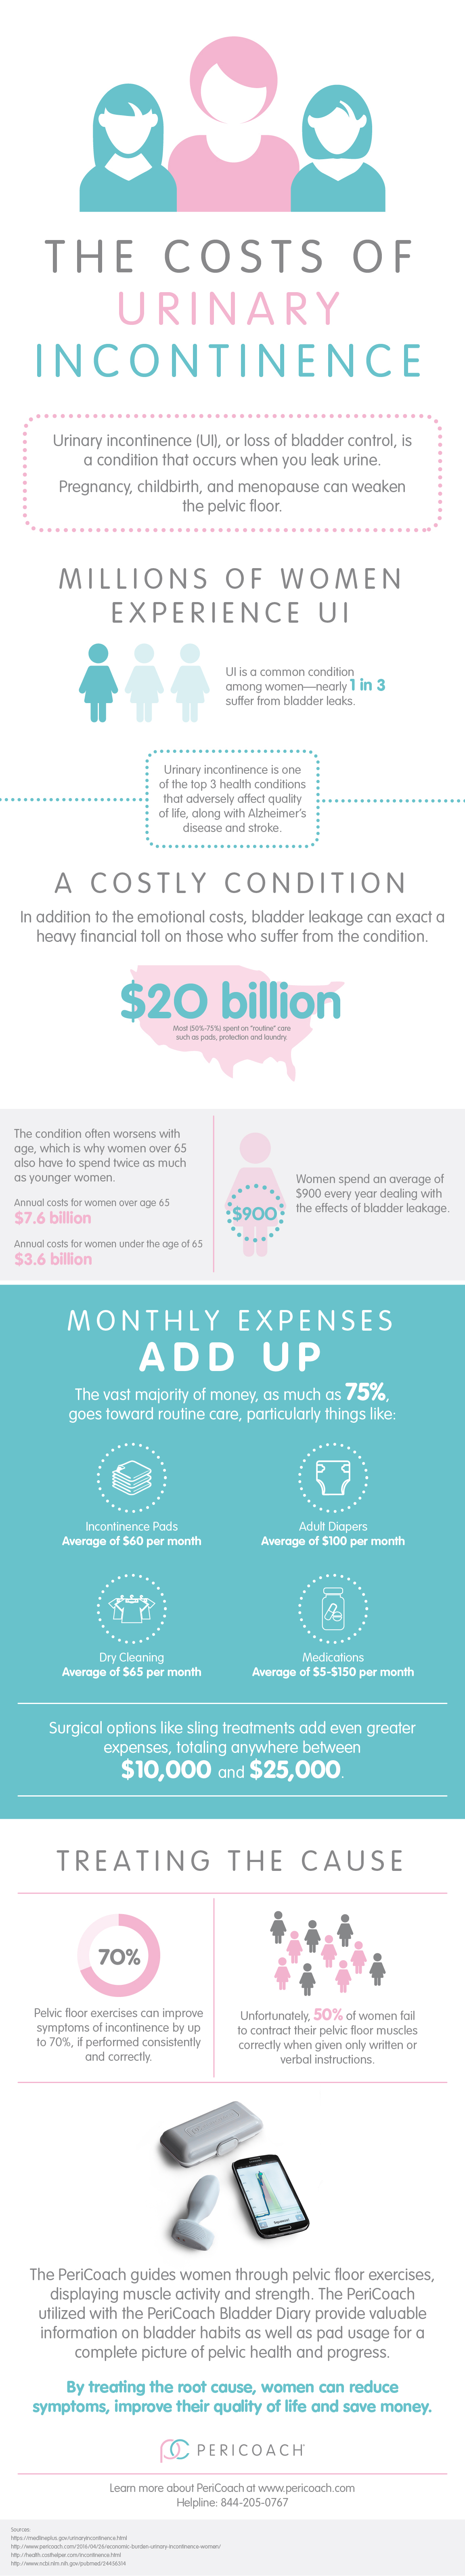 costs of urinary incontinence infographic